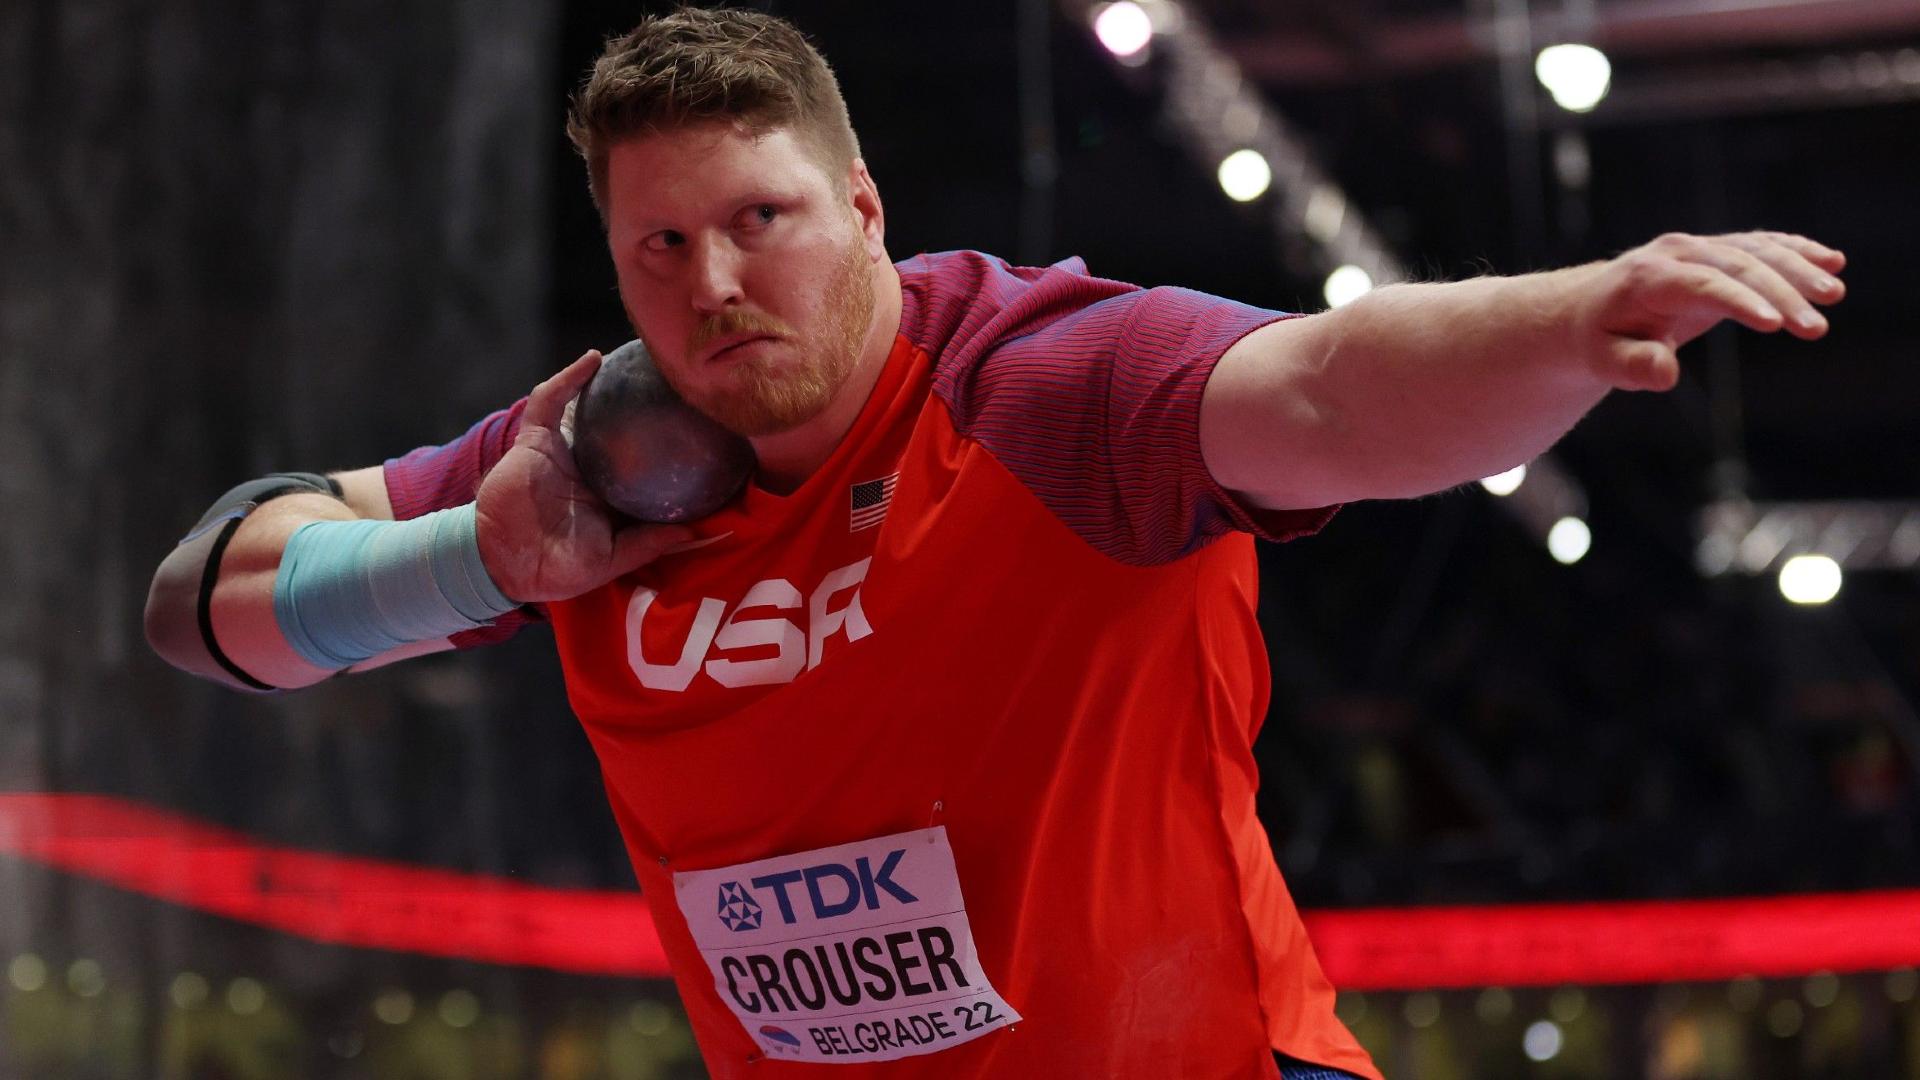 Two time Olympic Champion Ryan Crouser will be competing in the Milrose Games 2023